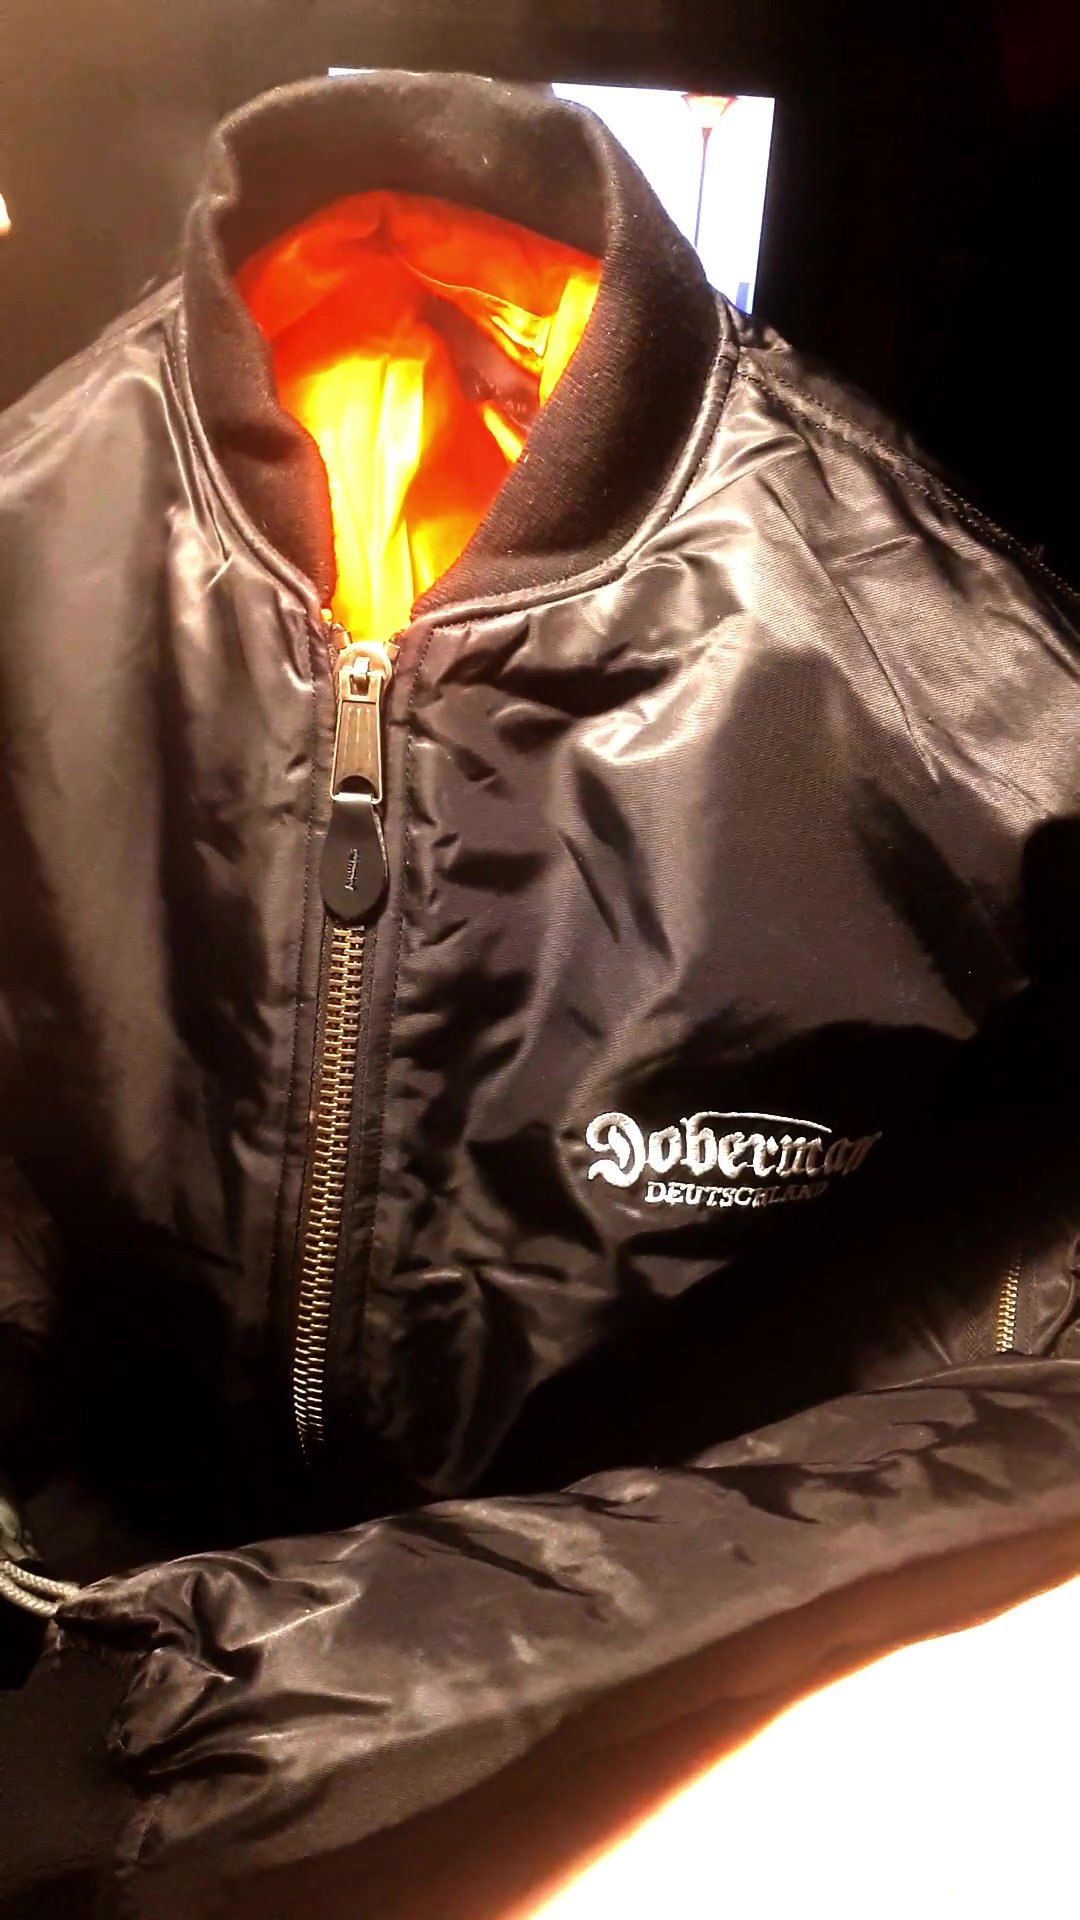 blowing clouds into bomberjacket